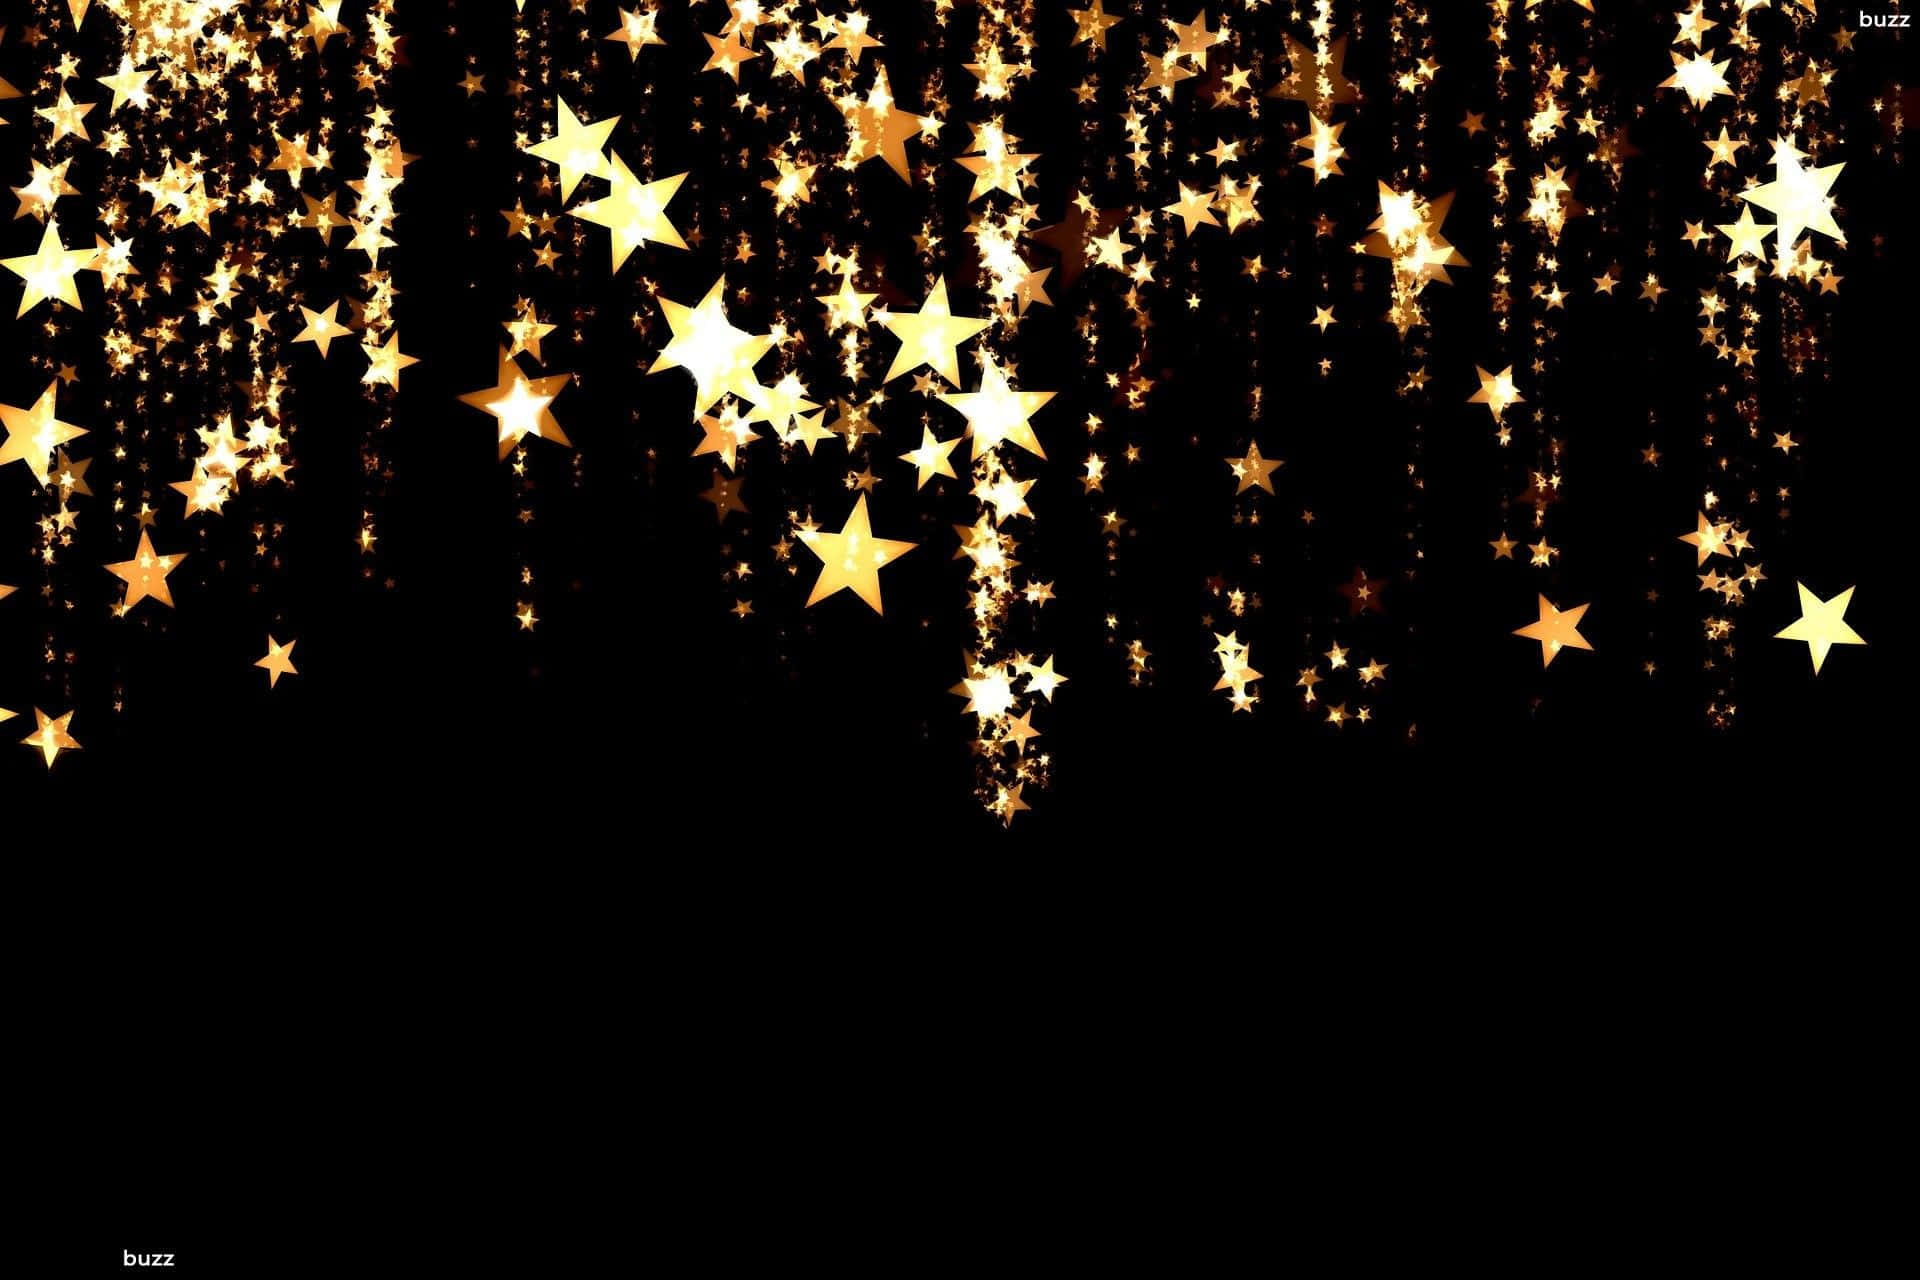 A rain of golden stars cascades through the night sky, shining bright in the darkness. Wallpaper